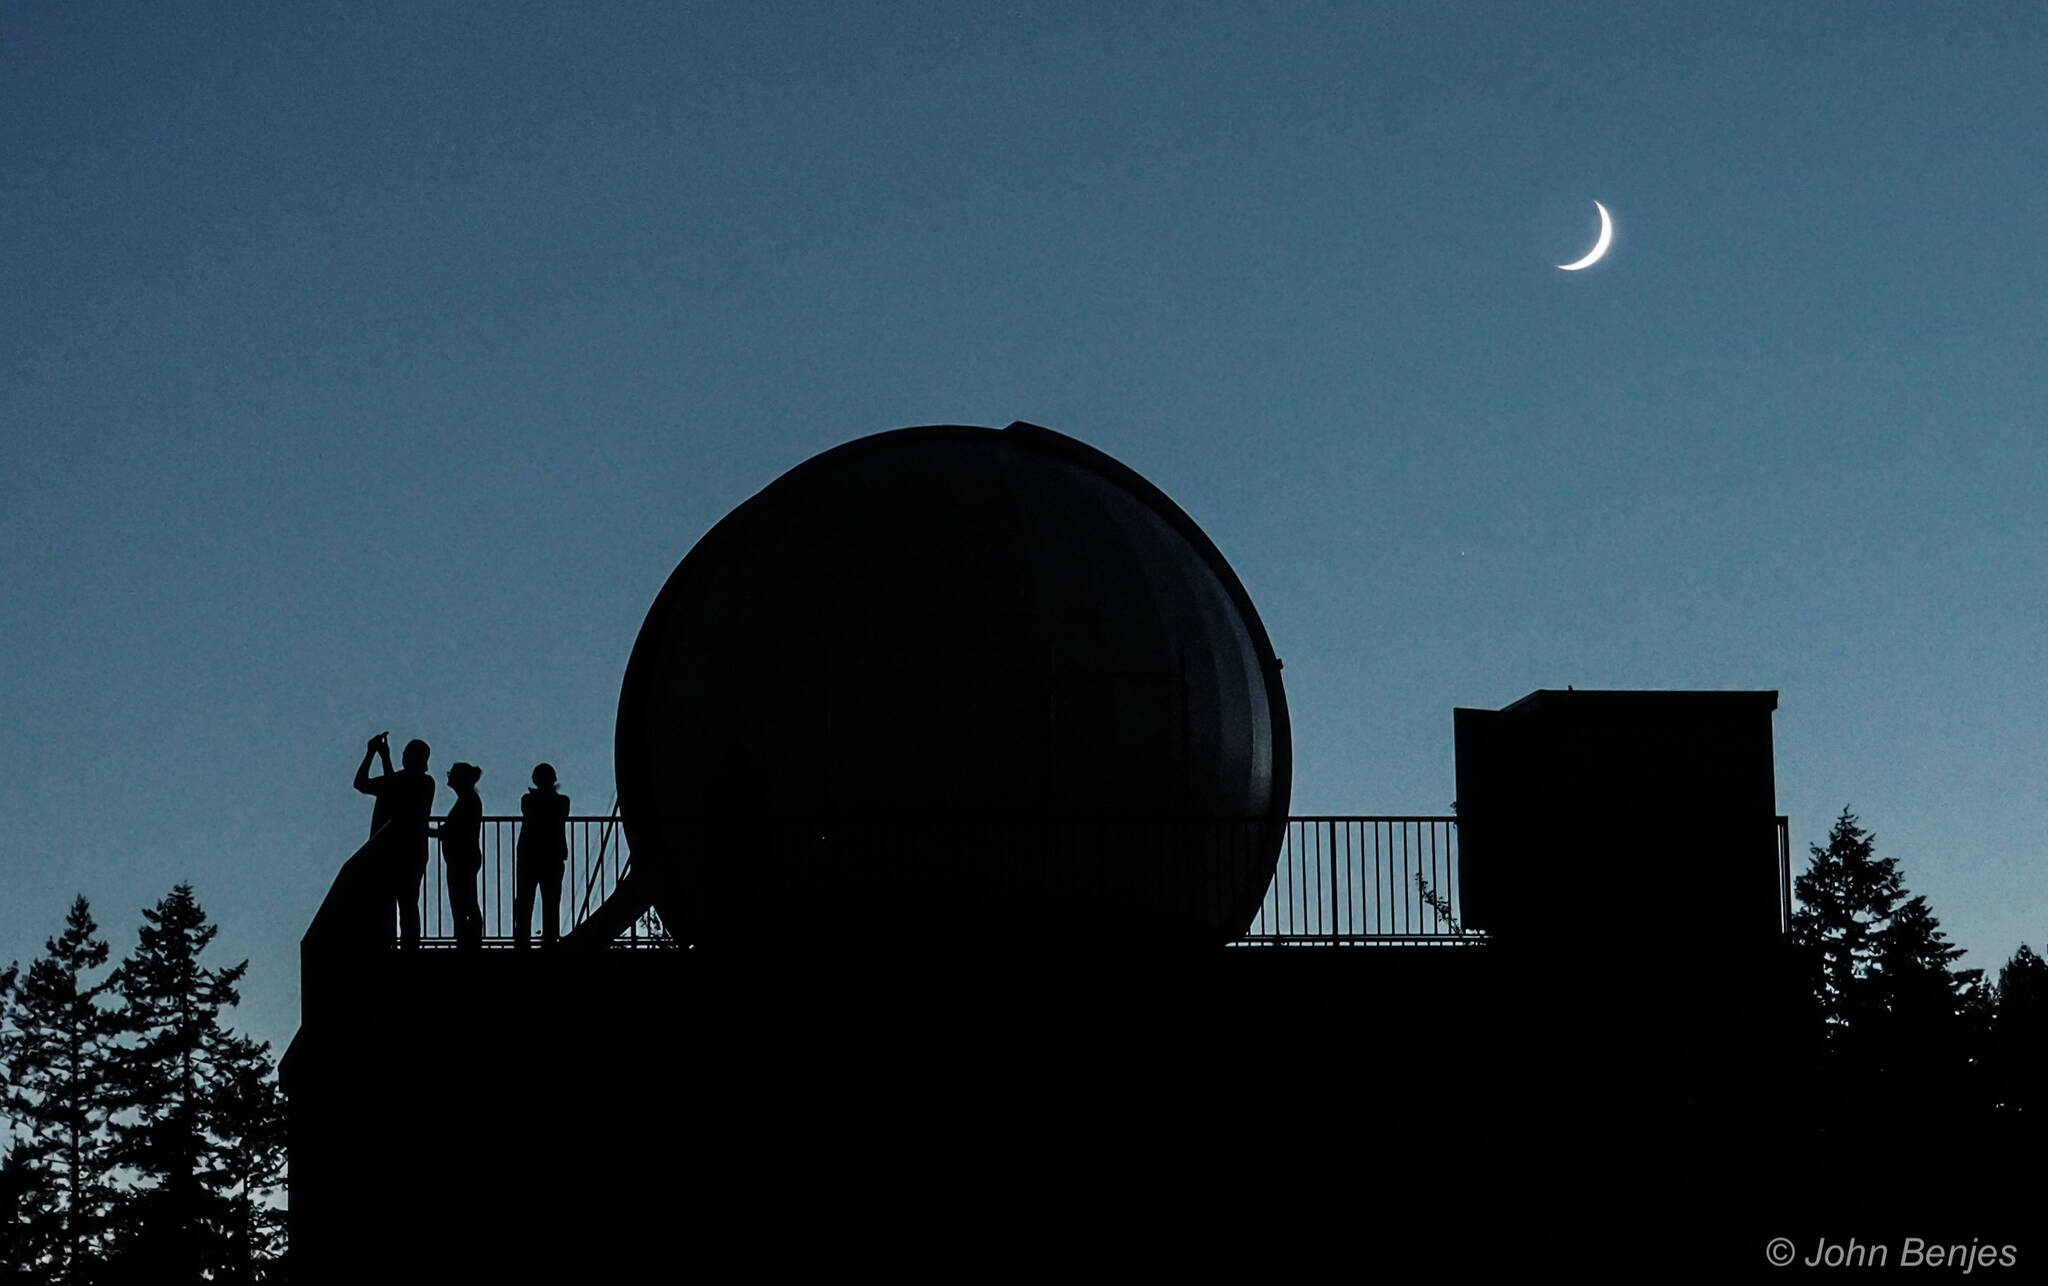 Silhouette at Edwin E. Ritchie Observatory. Photo by John Benjes, courtesy of Frank Petrie.